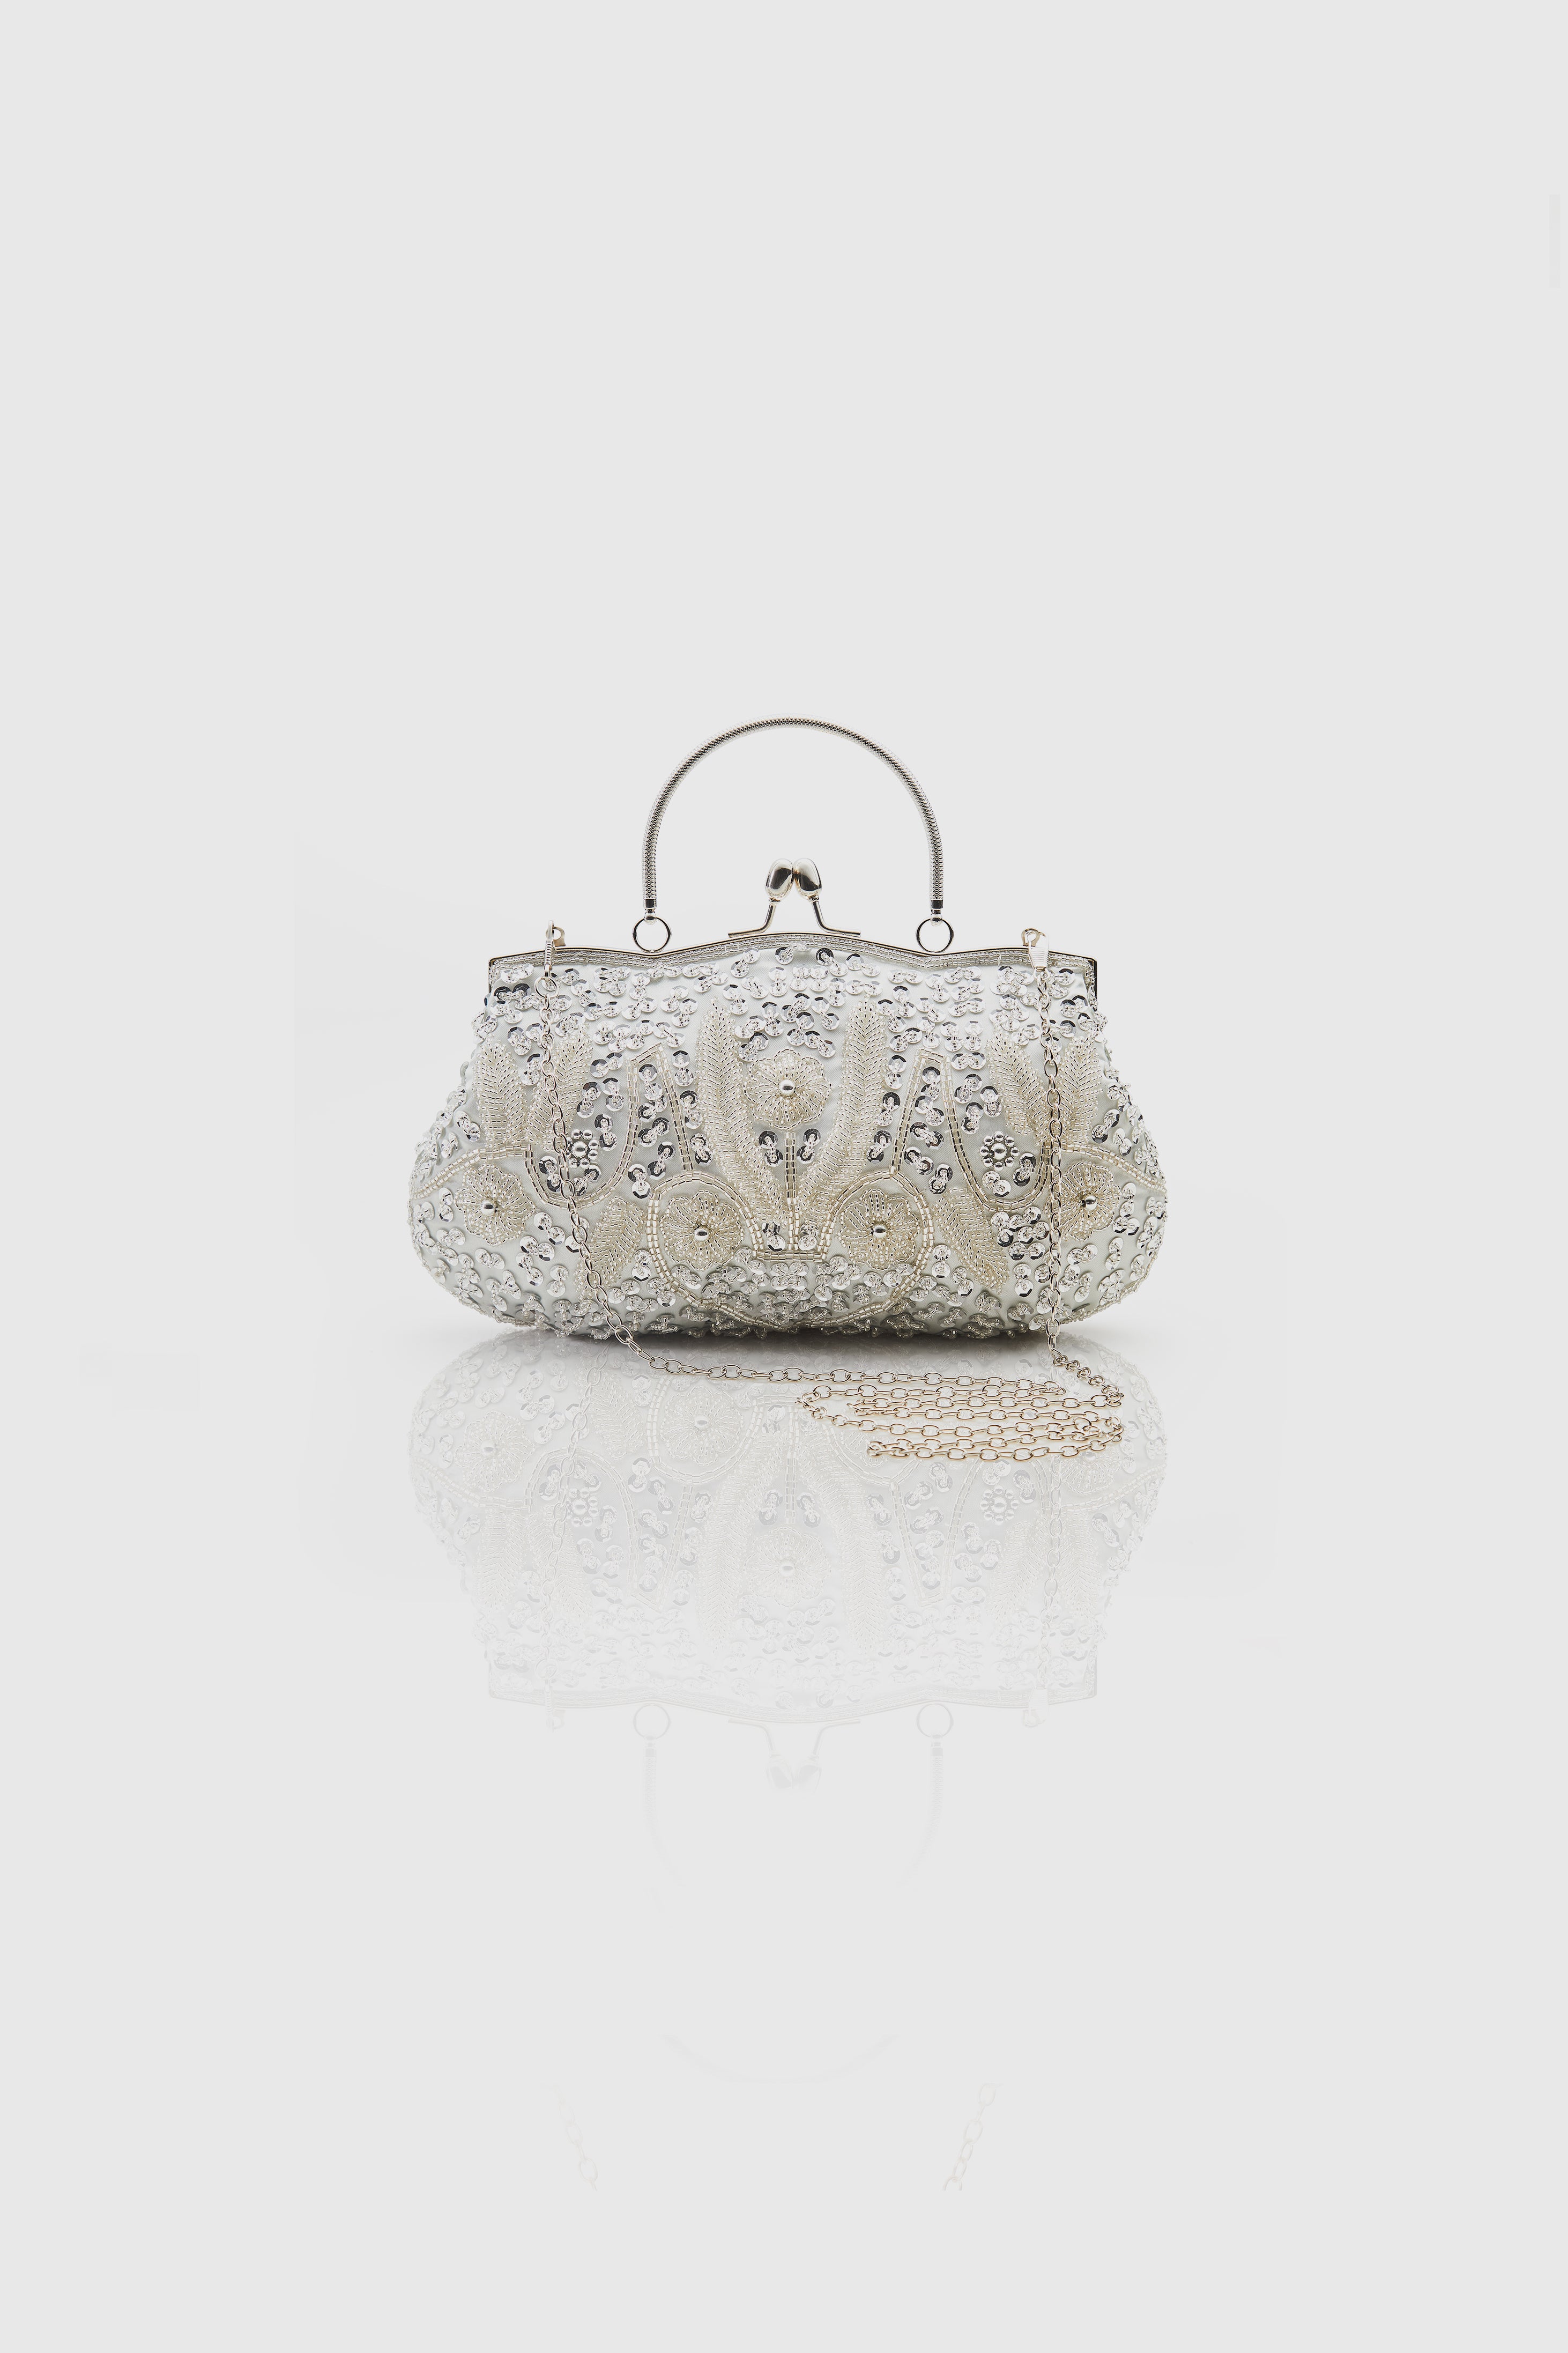 Women Pearl Evening Bag Bride Beaded Clutch Purse Cream White for Wedding  Party, Ivory White, Small : Amazon.in: Fashion